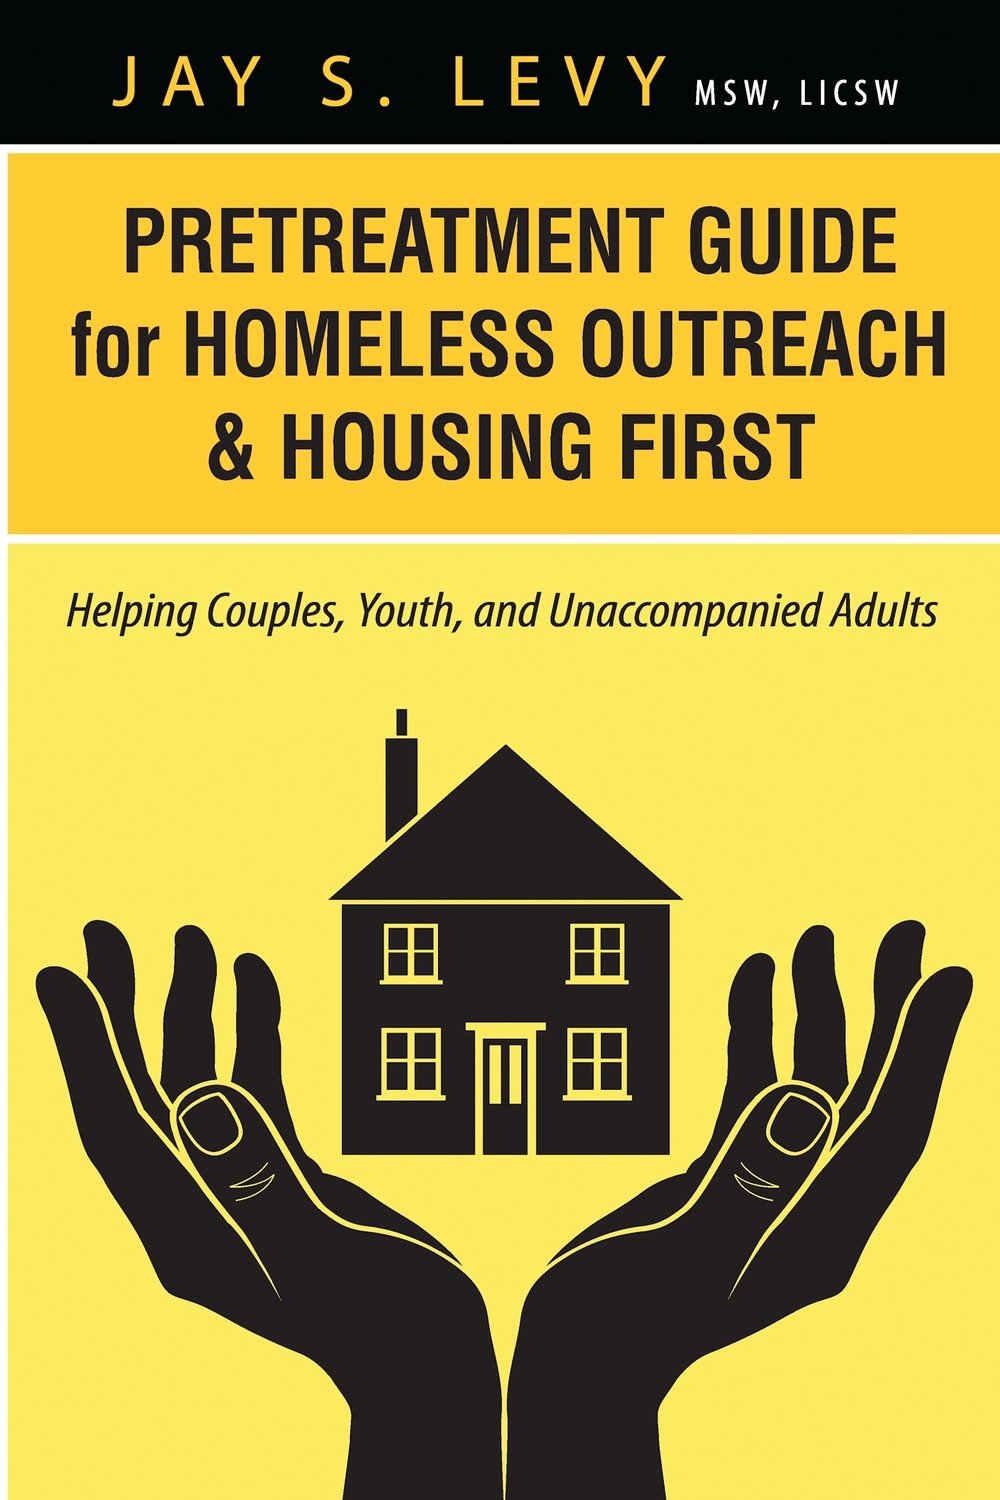 Pretreatment Guide for Homeless Outreach & Housing First